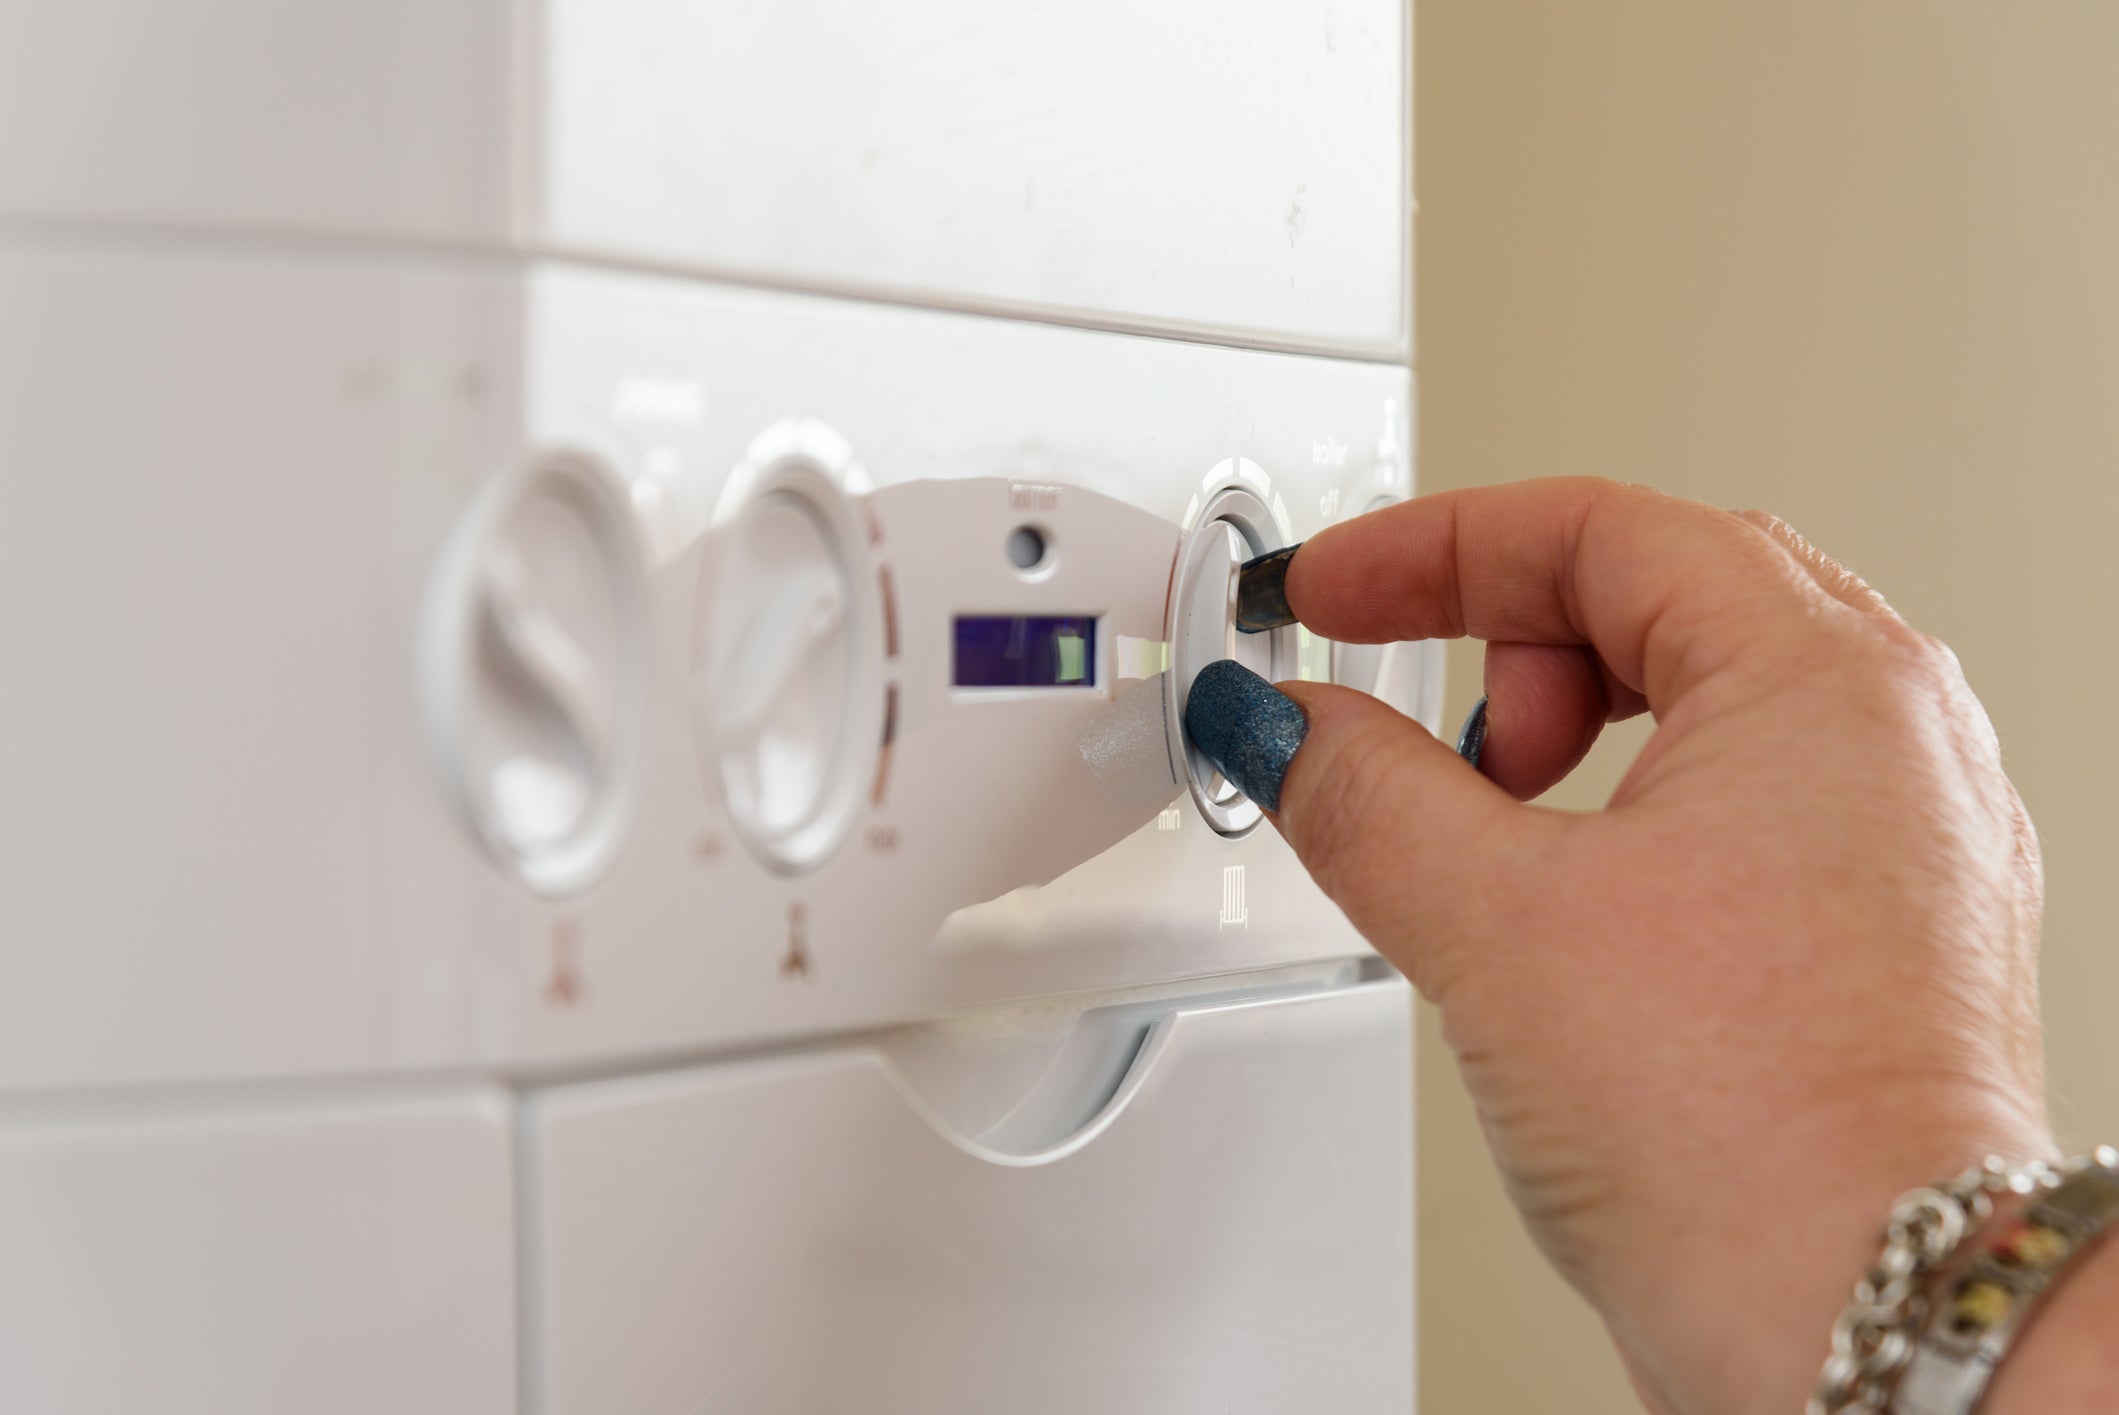 Millions of Britons have not had their boiler serviced for a year, a survey claims